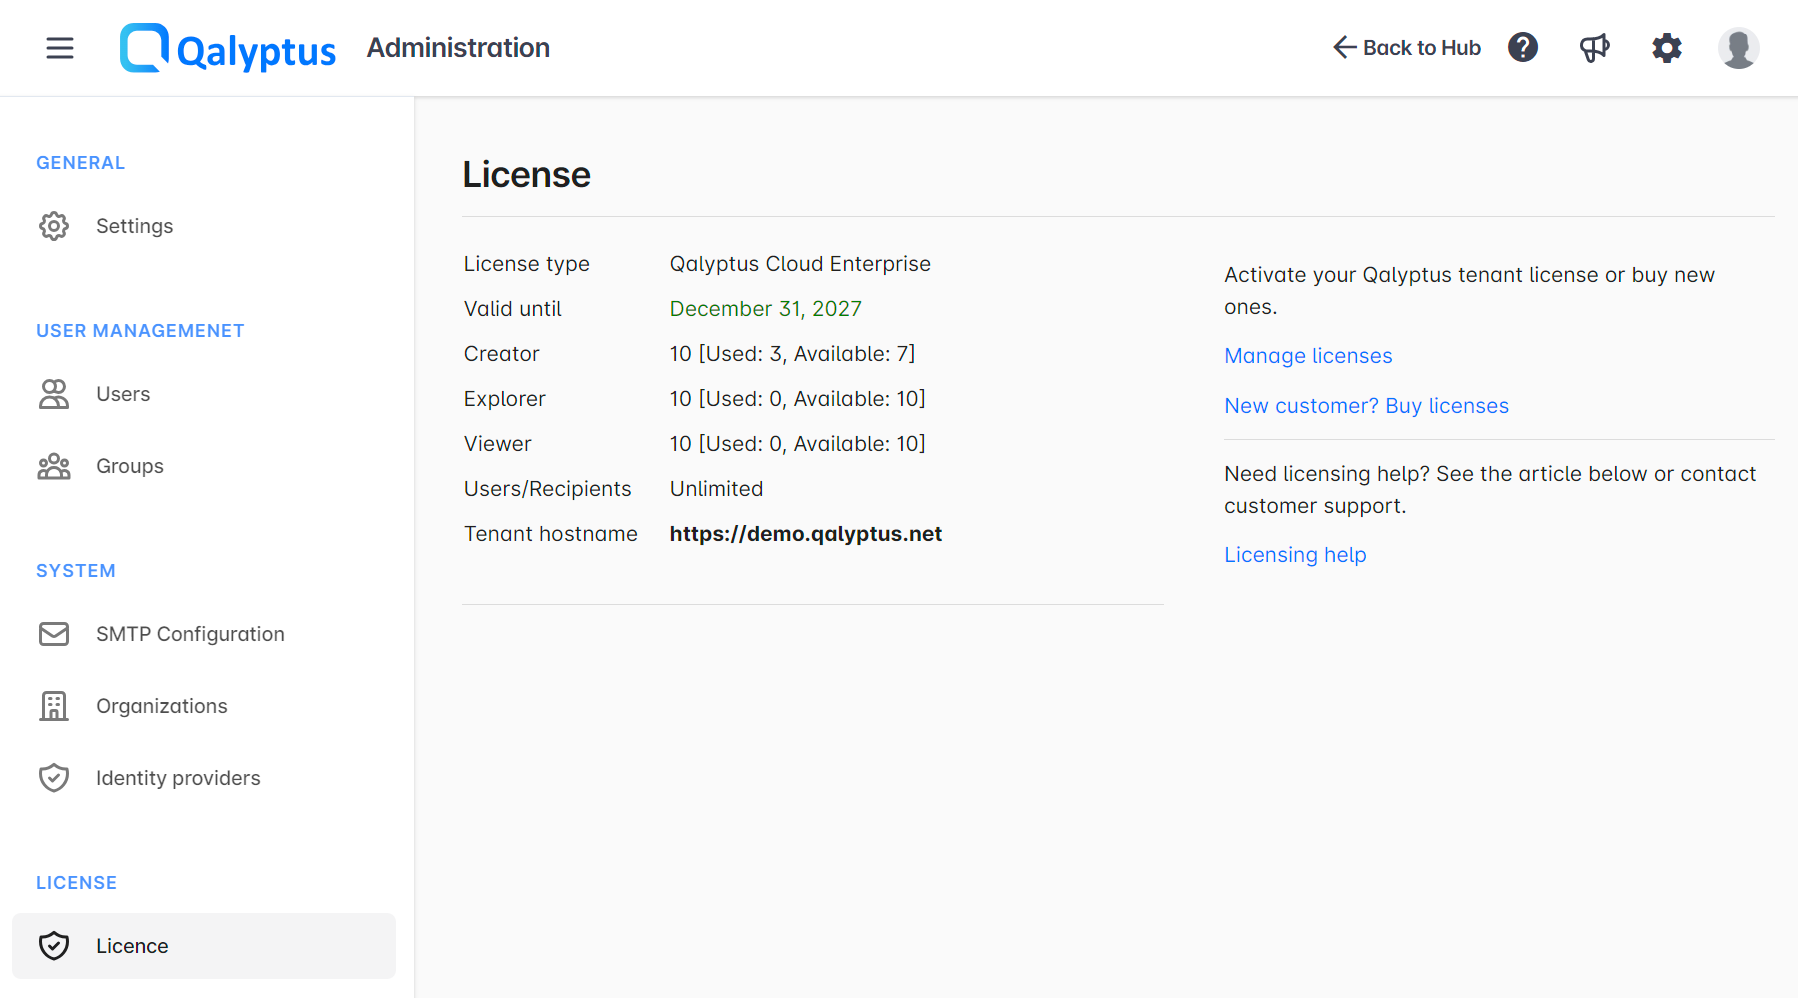 Licenses page